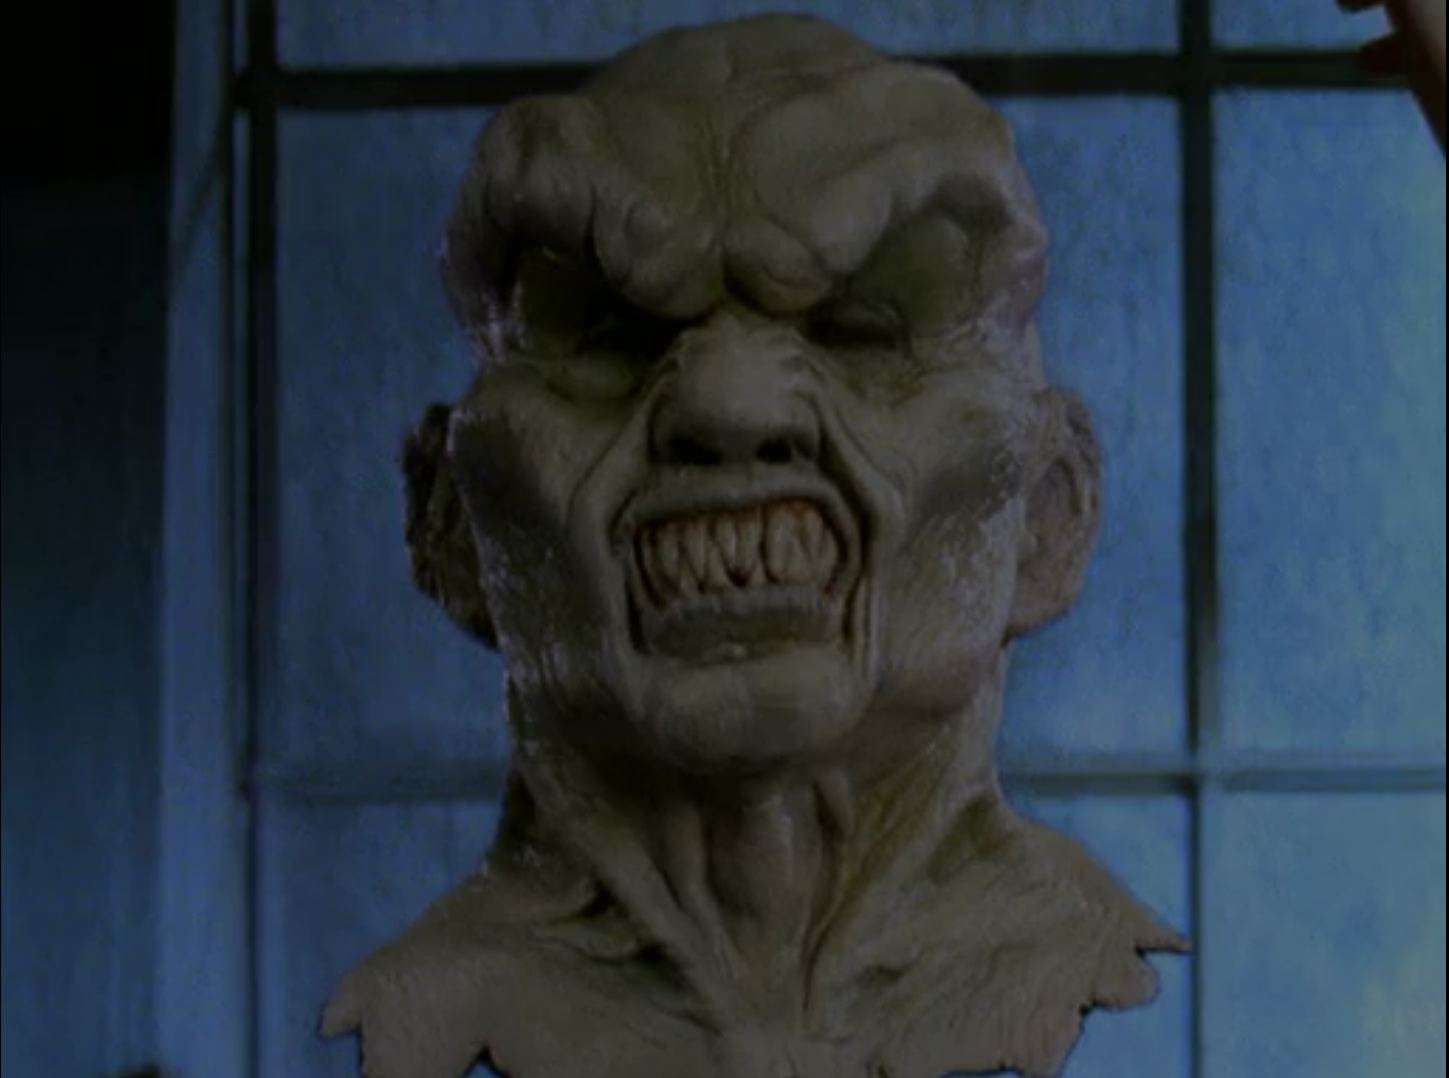 The Haunted Mask From Goosebumps